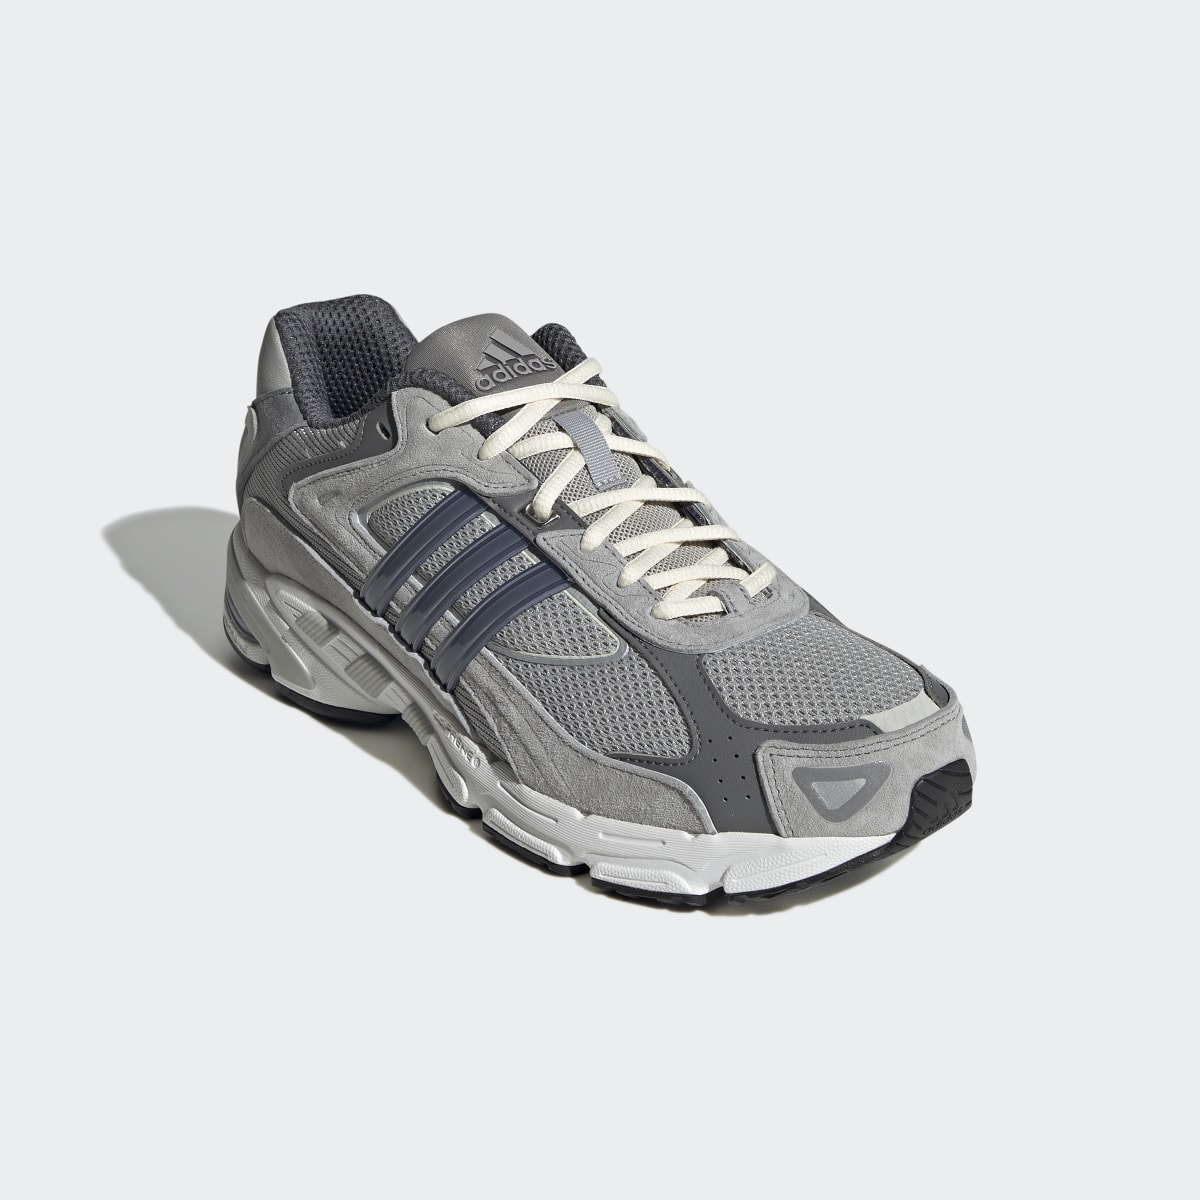 Adidas Response CL Shoes. 7